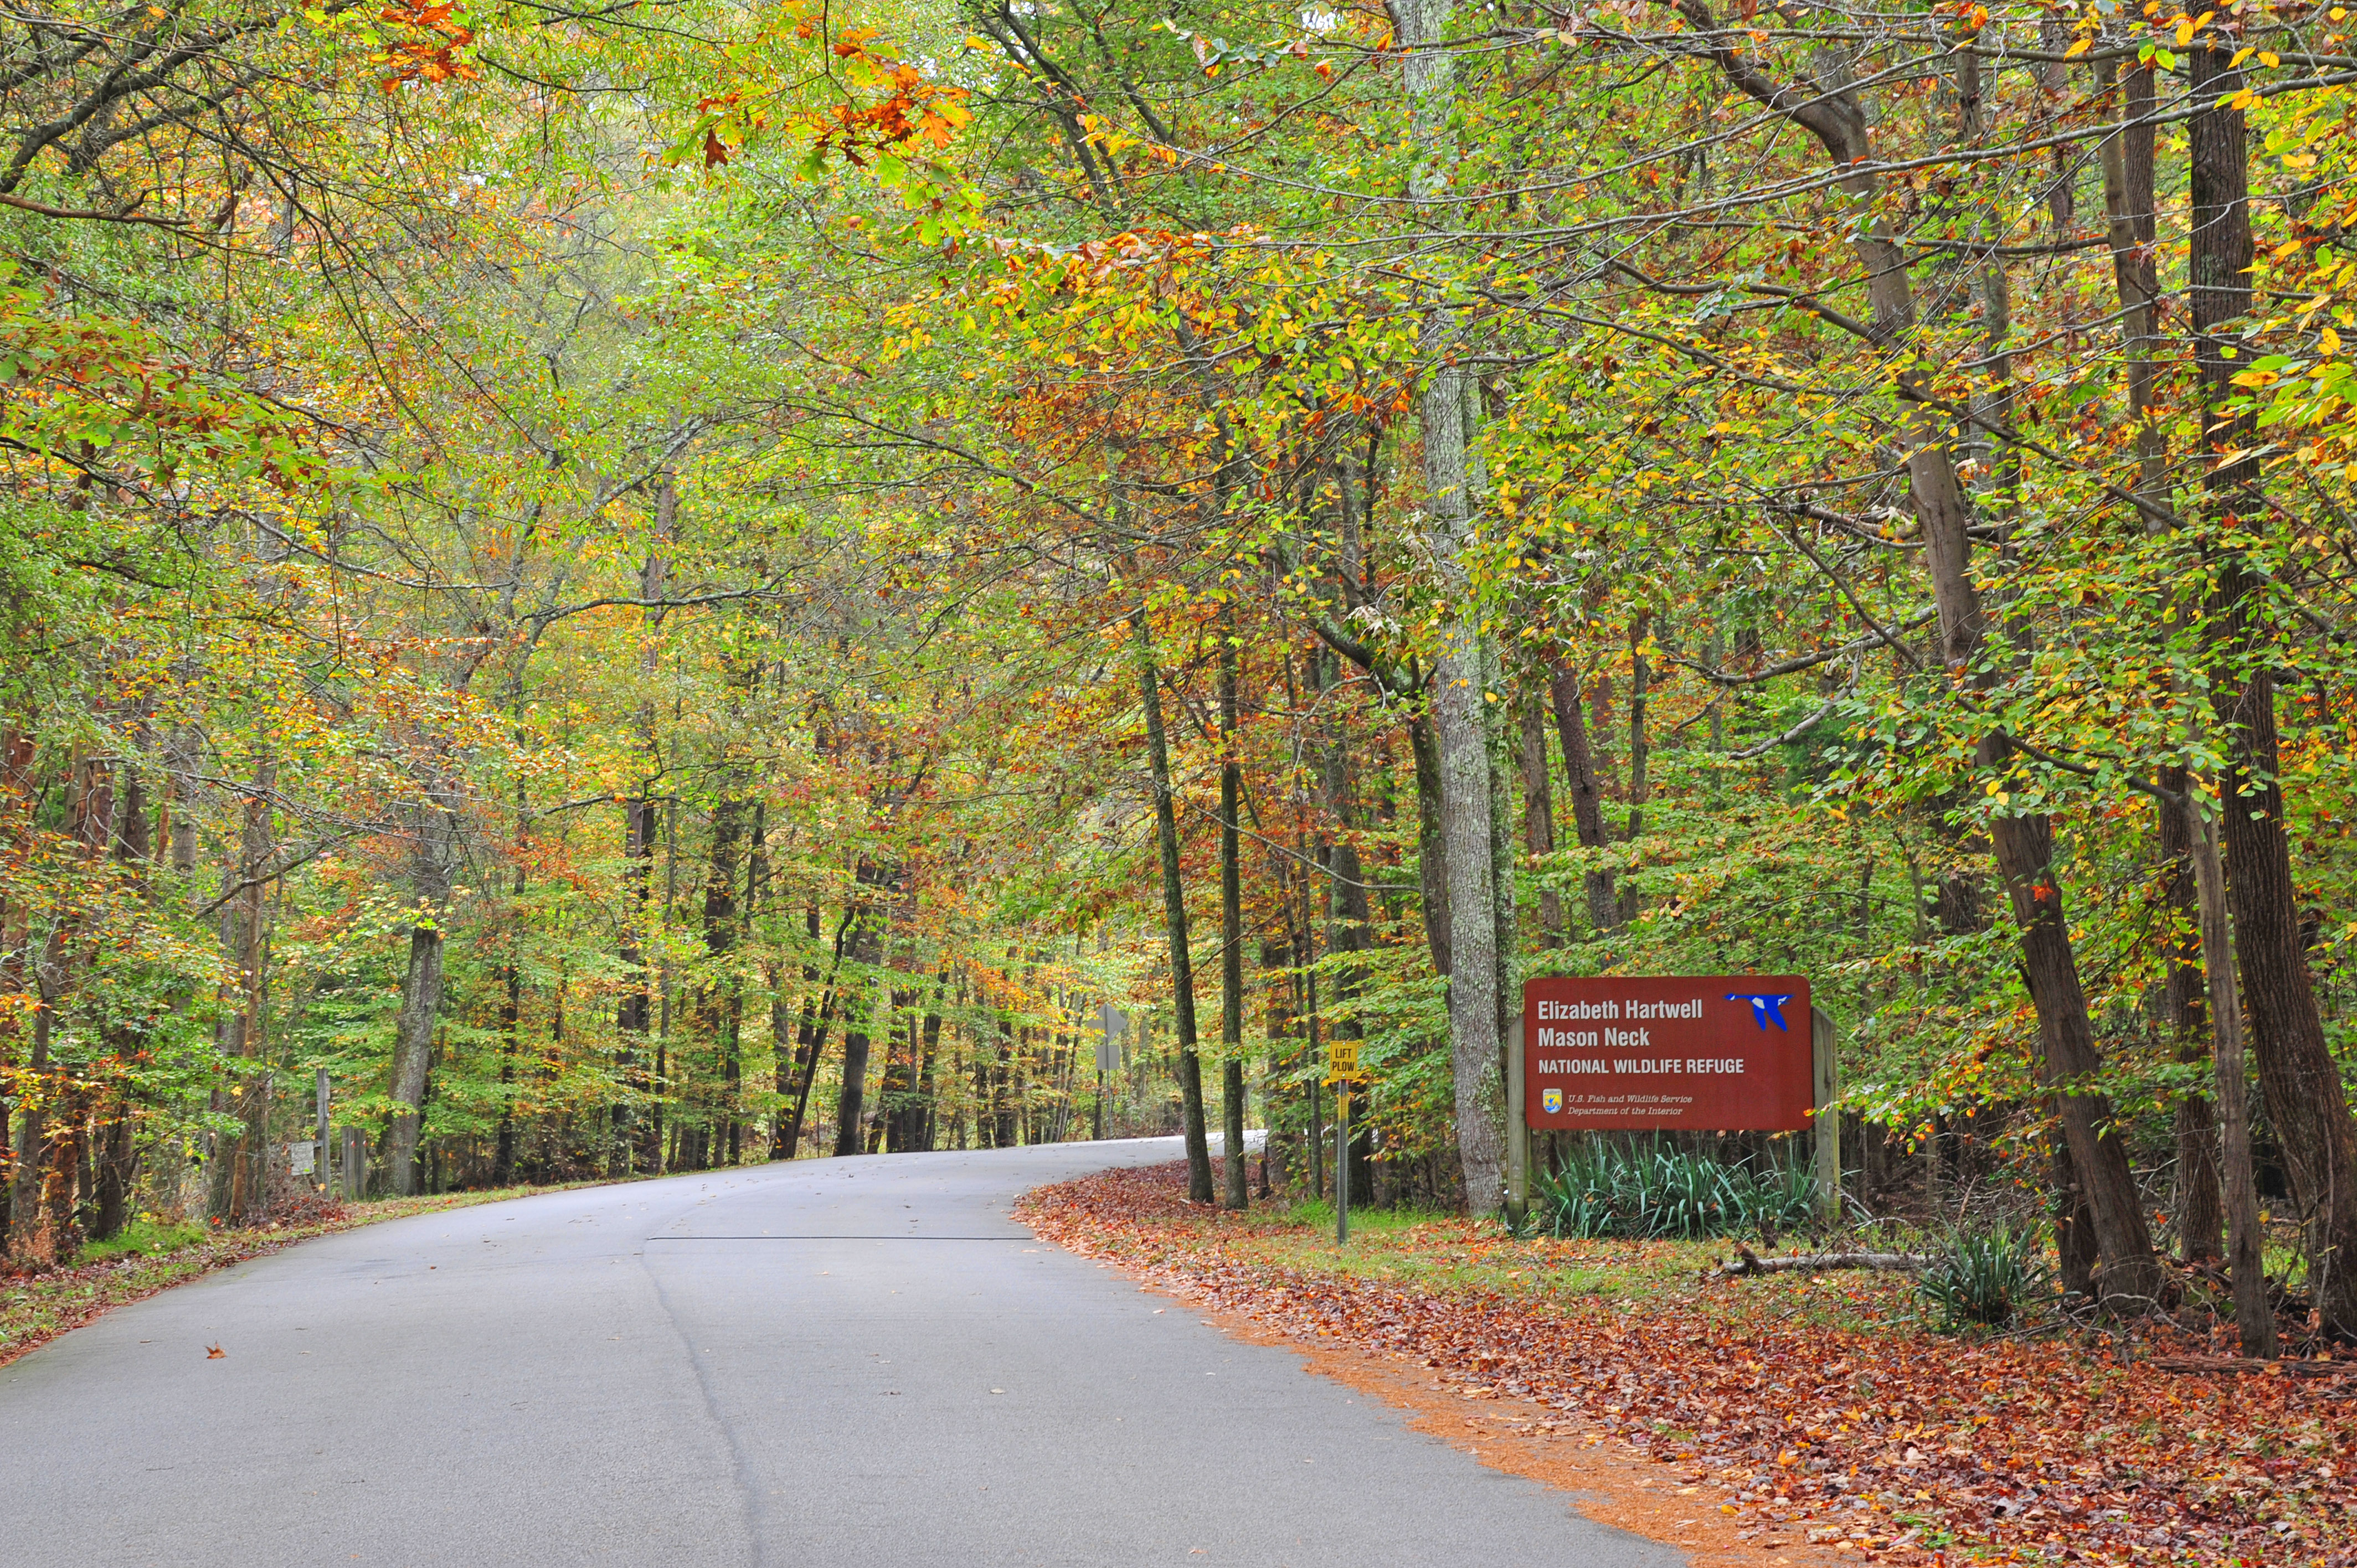 A view of the entrance sign for Elizabeth Hartwell Mason Neck NWR, and main road passing through fall foliage in the surrounding forest.